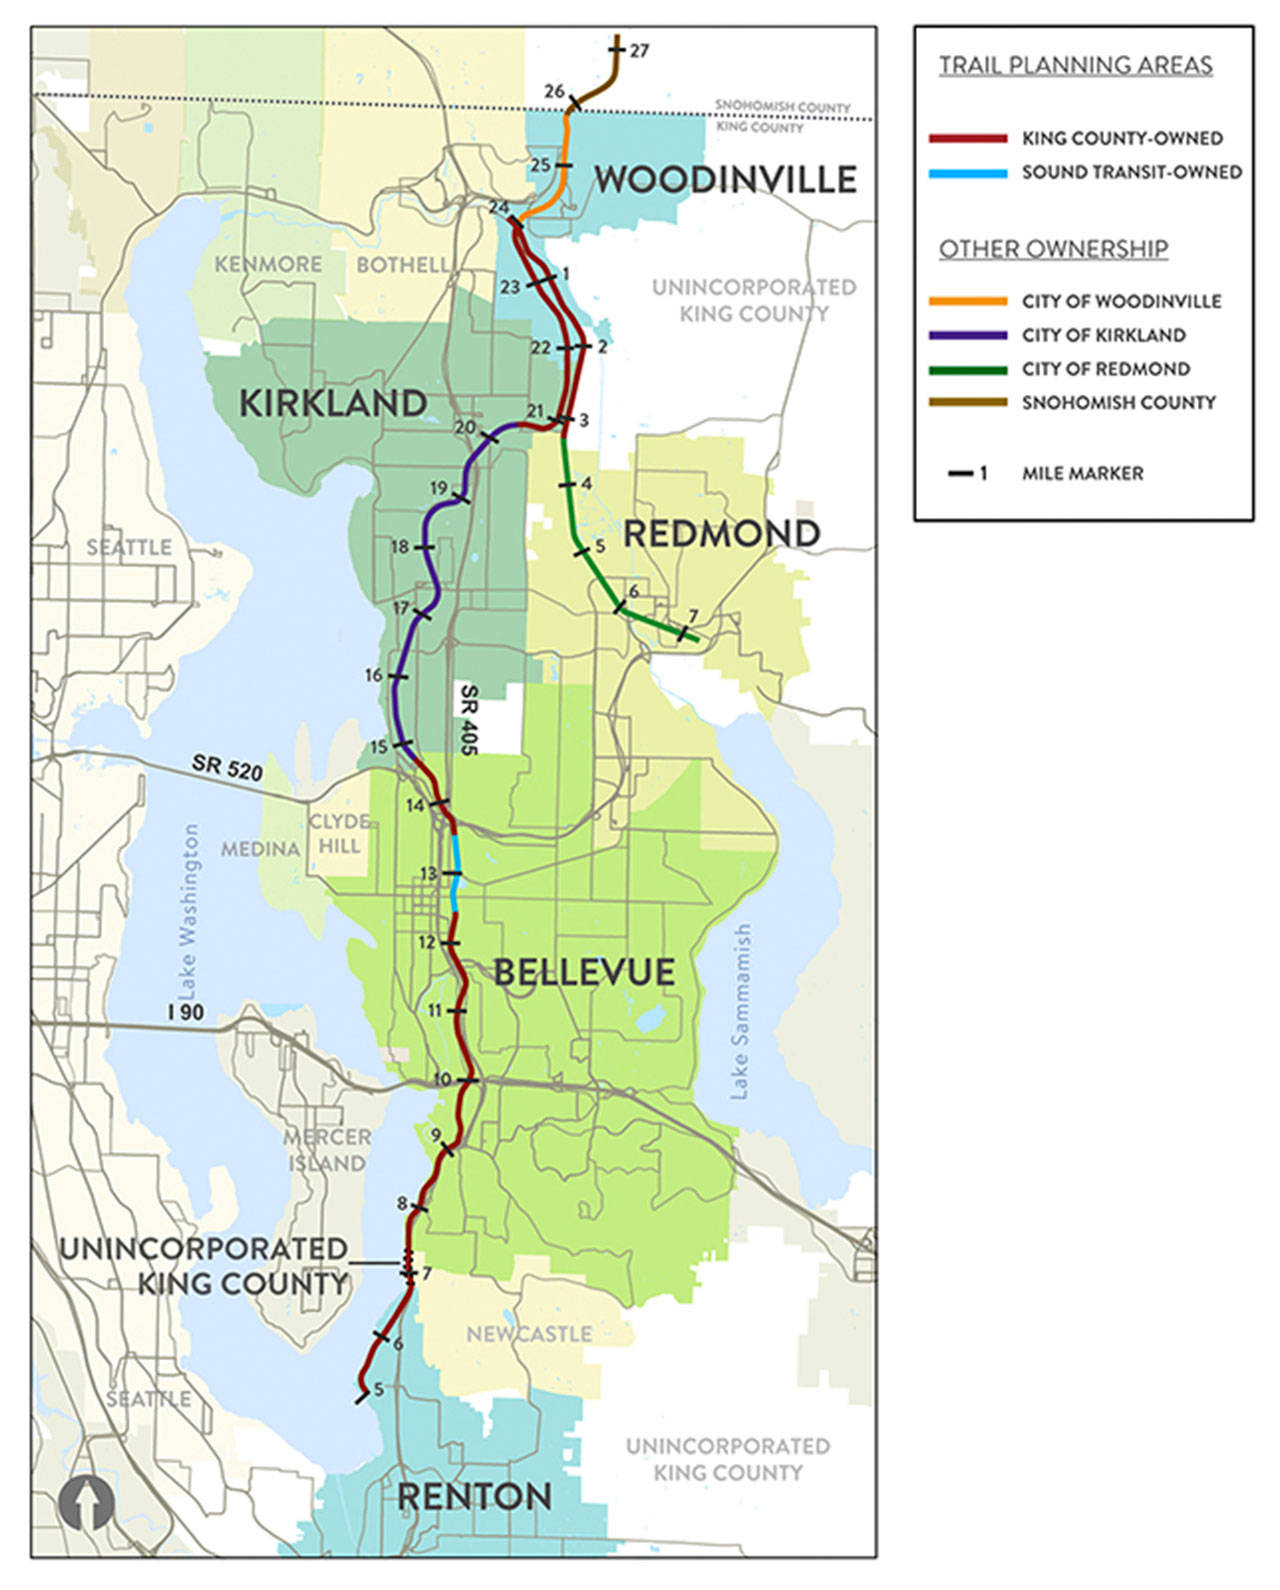 King County map of the entire Eastside Railway Corridor that shows how it connects the area from Woodinville to Renton. Image courtesy of King County.